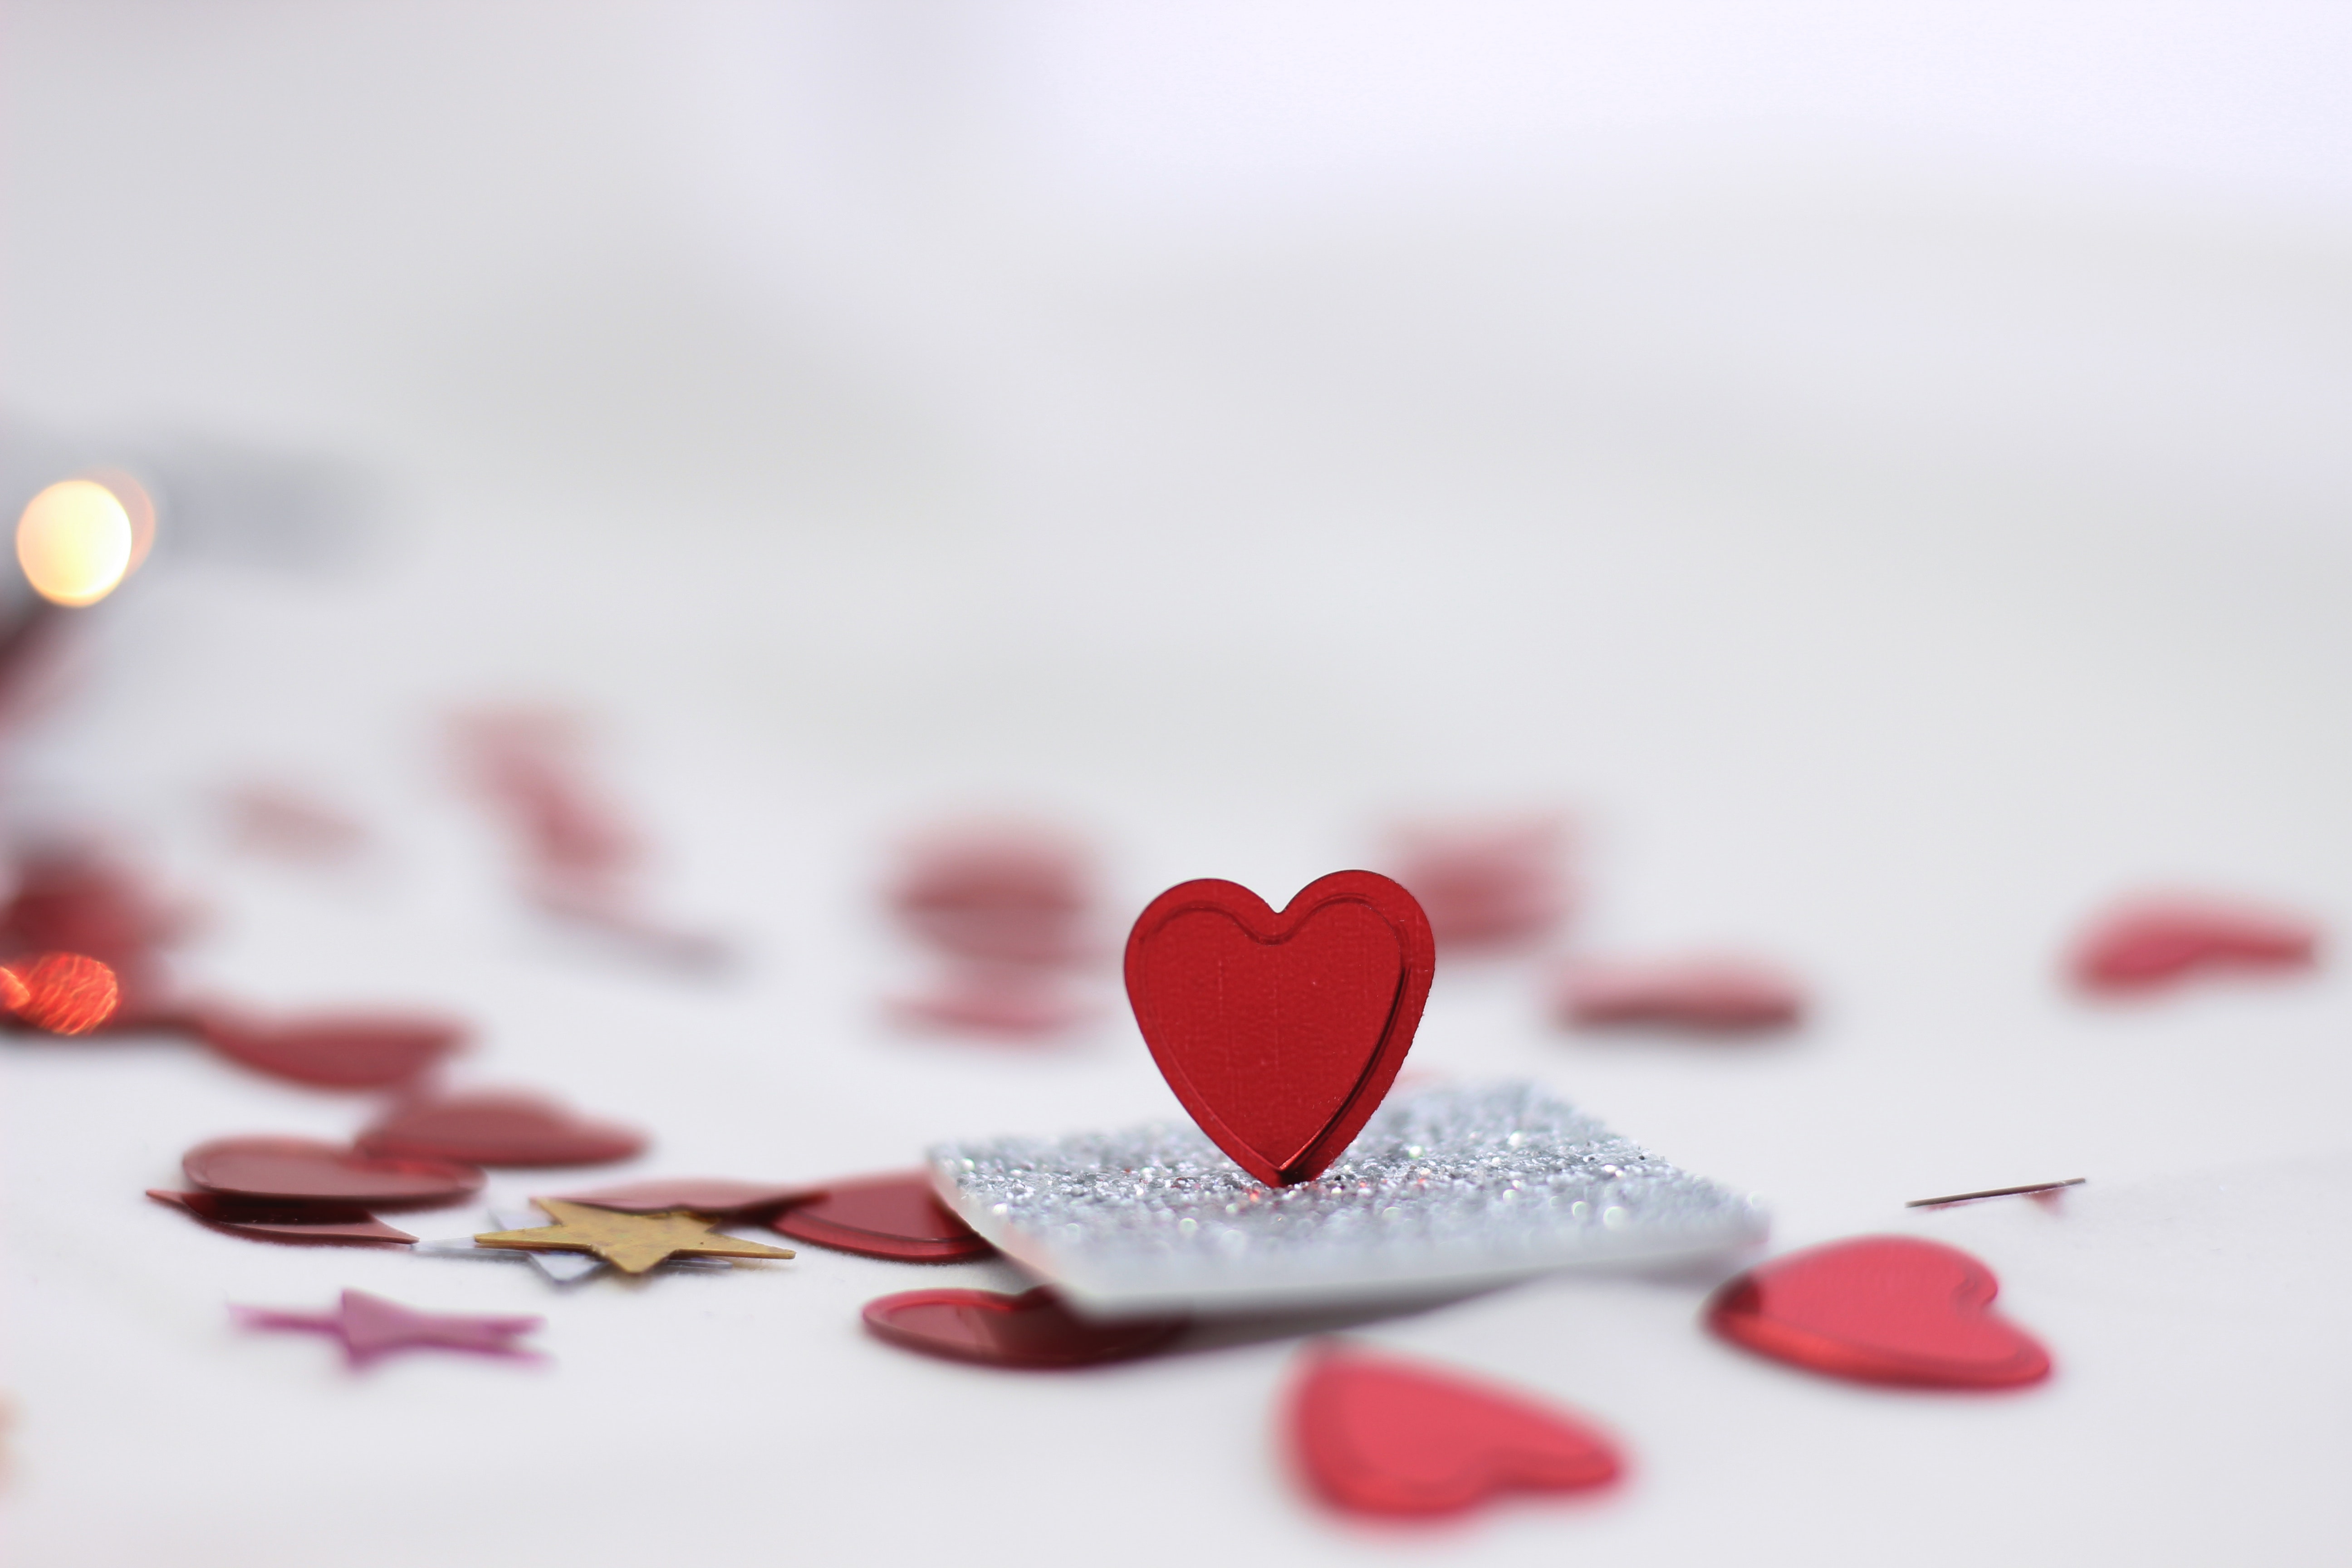 Romantic background photos download the best free romantic background stock photos hd images